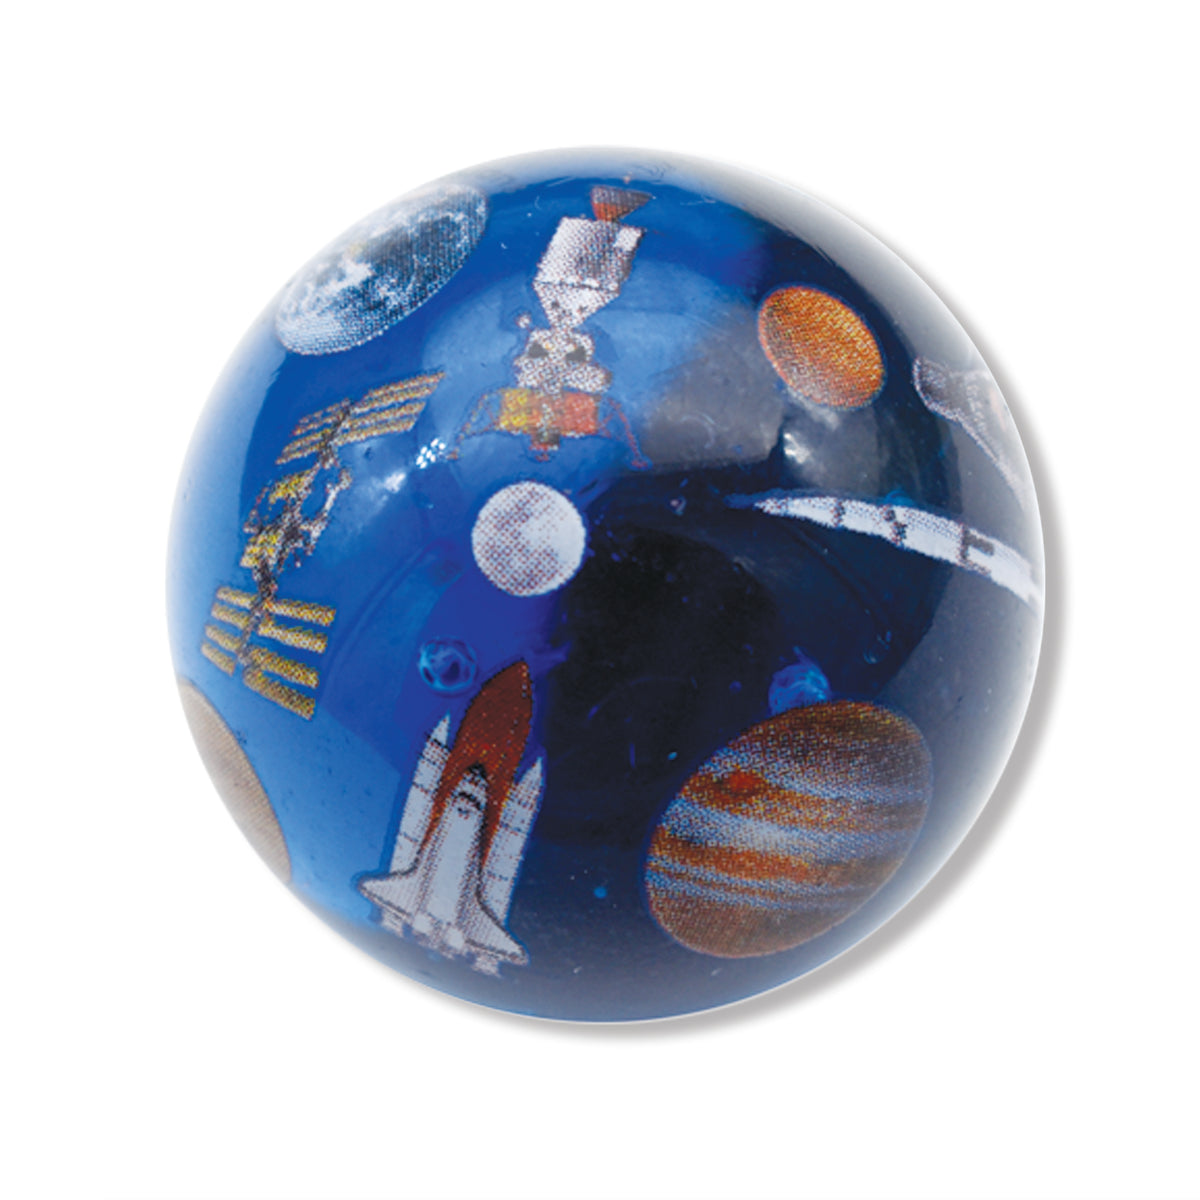 solar system puzzle ball